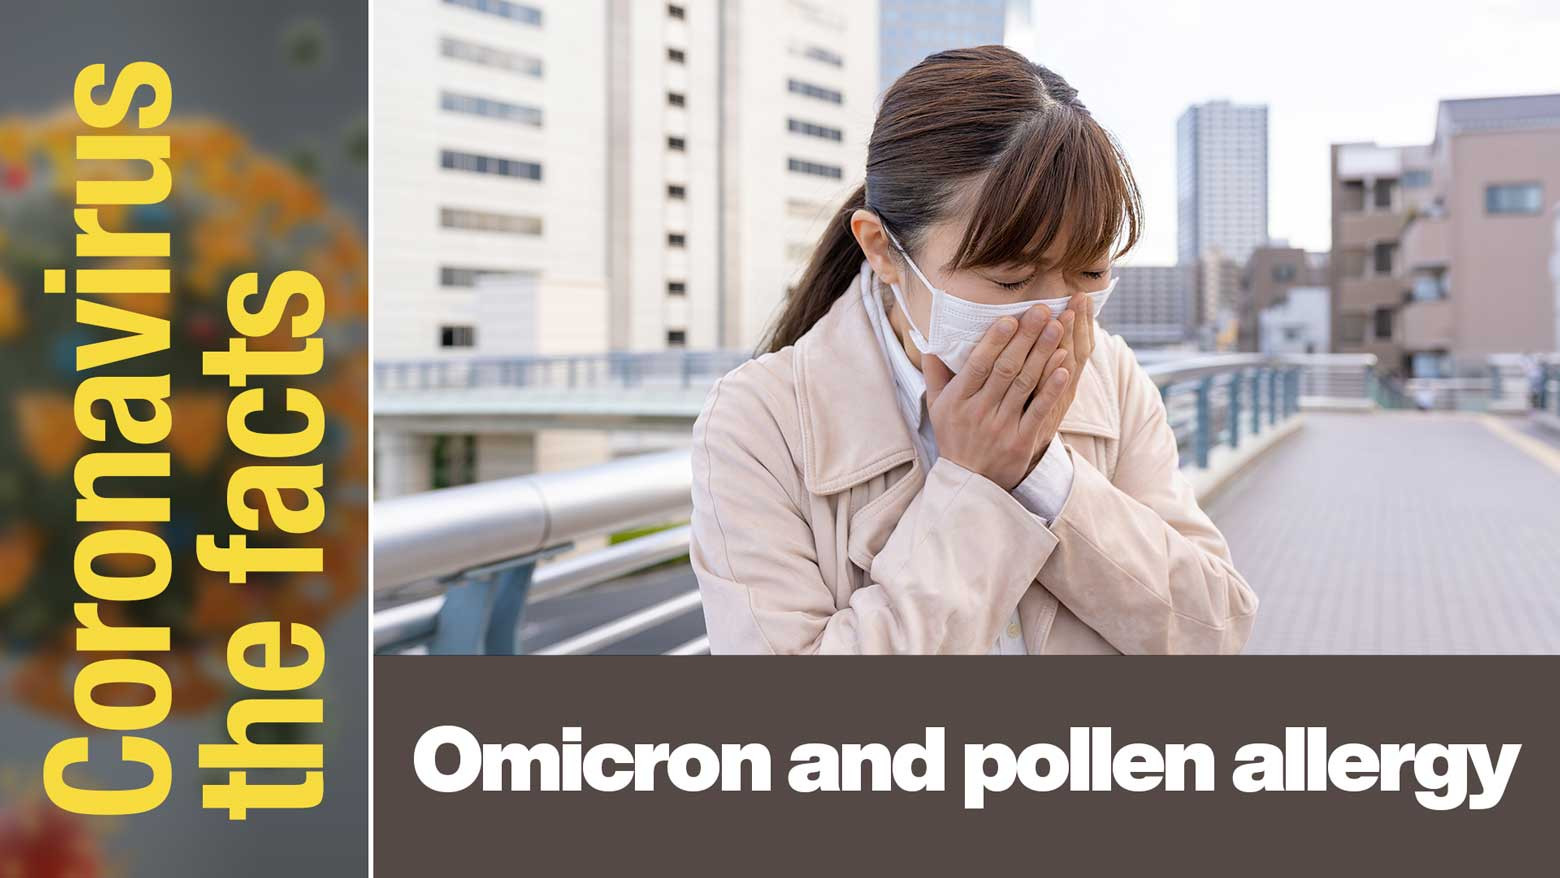 Pollen allergy symptoms can be confused with coronavirus